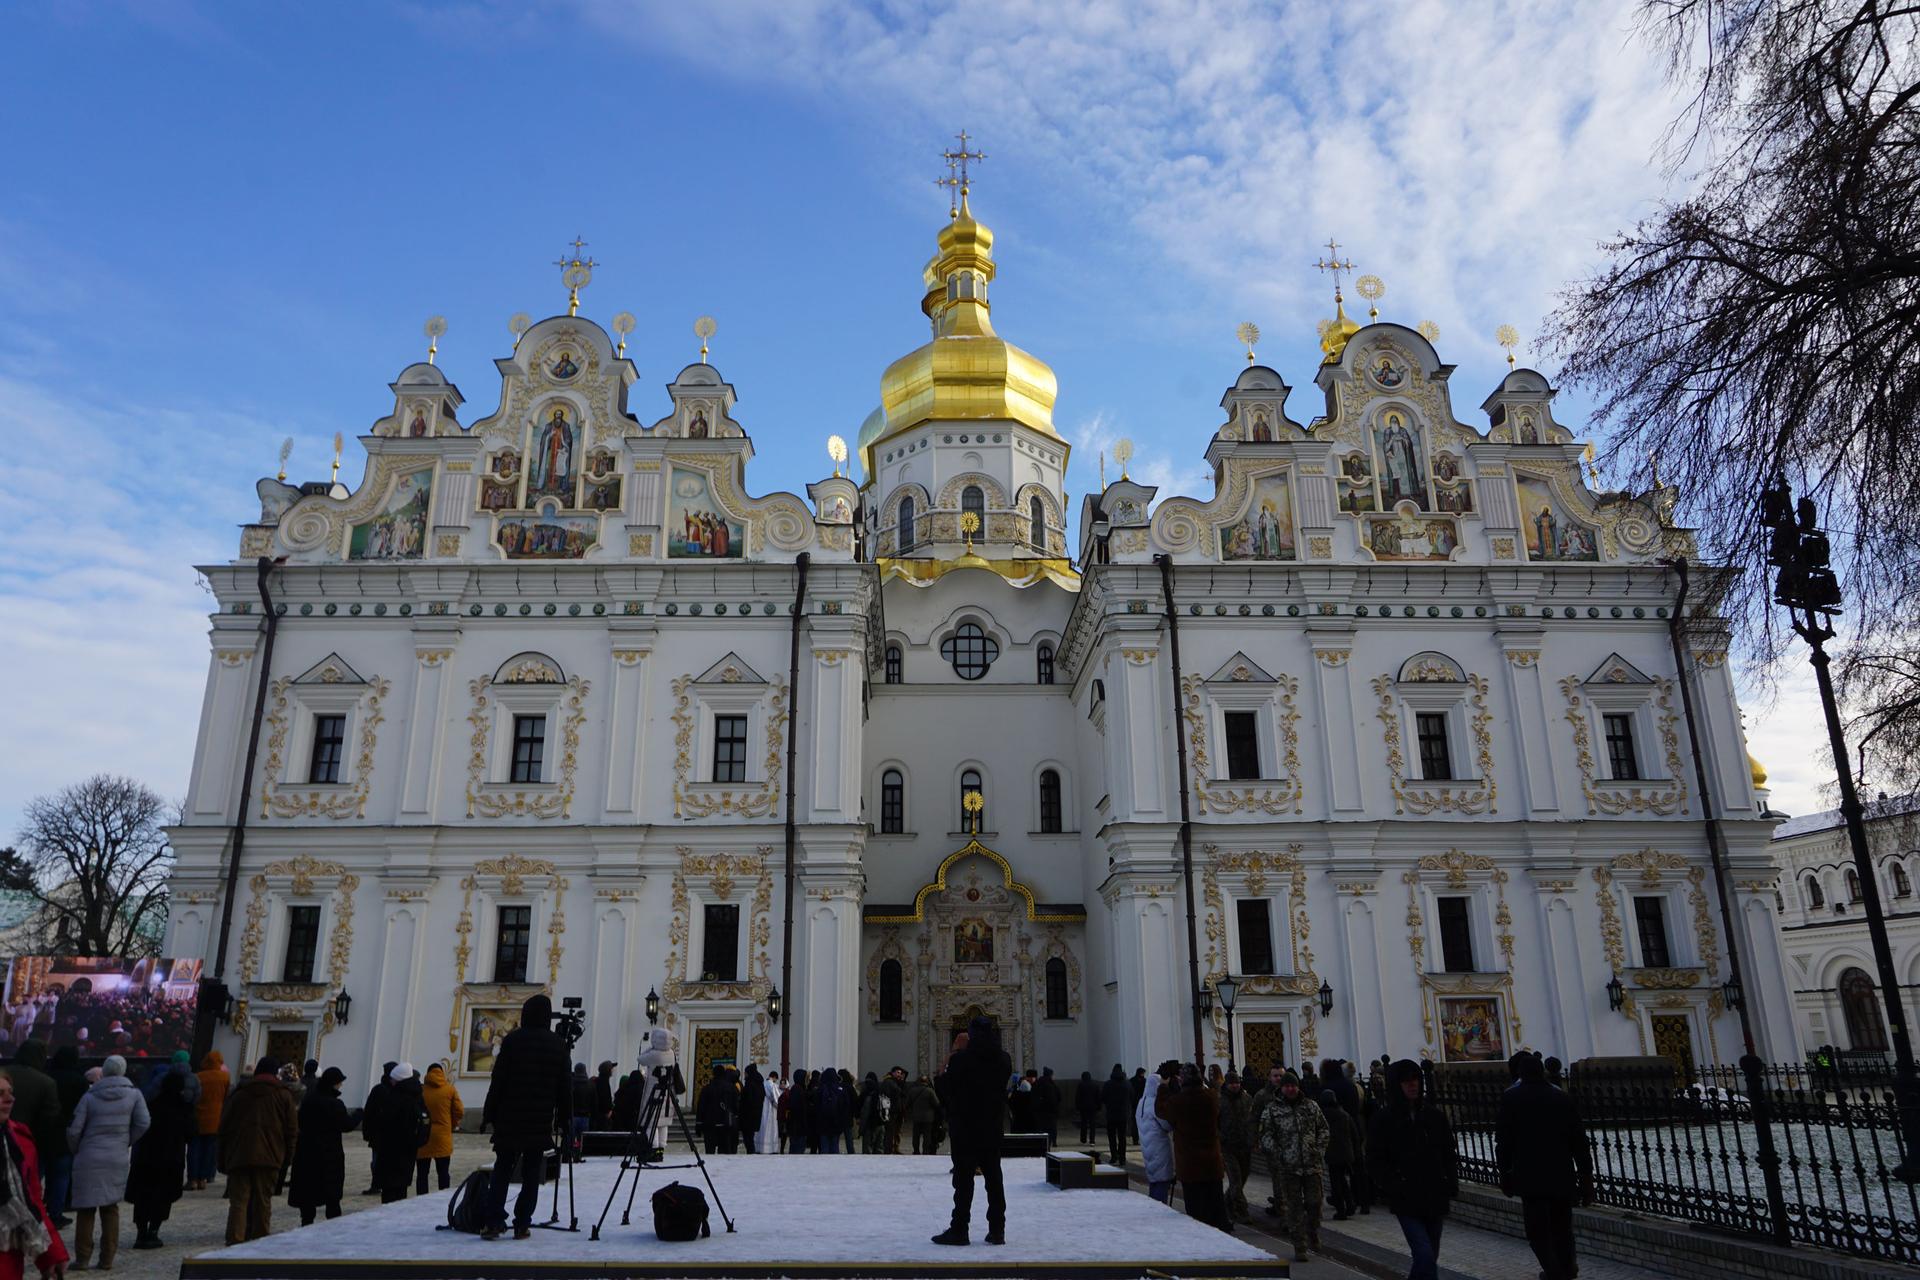 The Kyiv Pesherska Lavra, the Monastery of the Caves, in Kyiv, Ukraine, ornate cathedral, is a UNESCO World Heritage Site and it’s the heart of Ukrainian Orthodoxy.